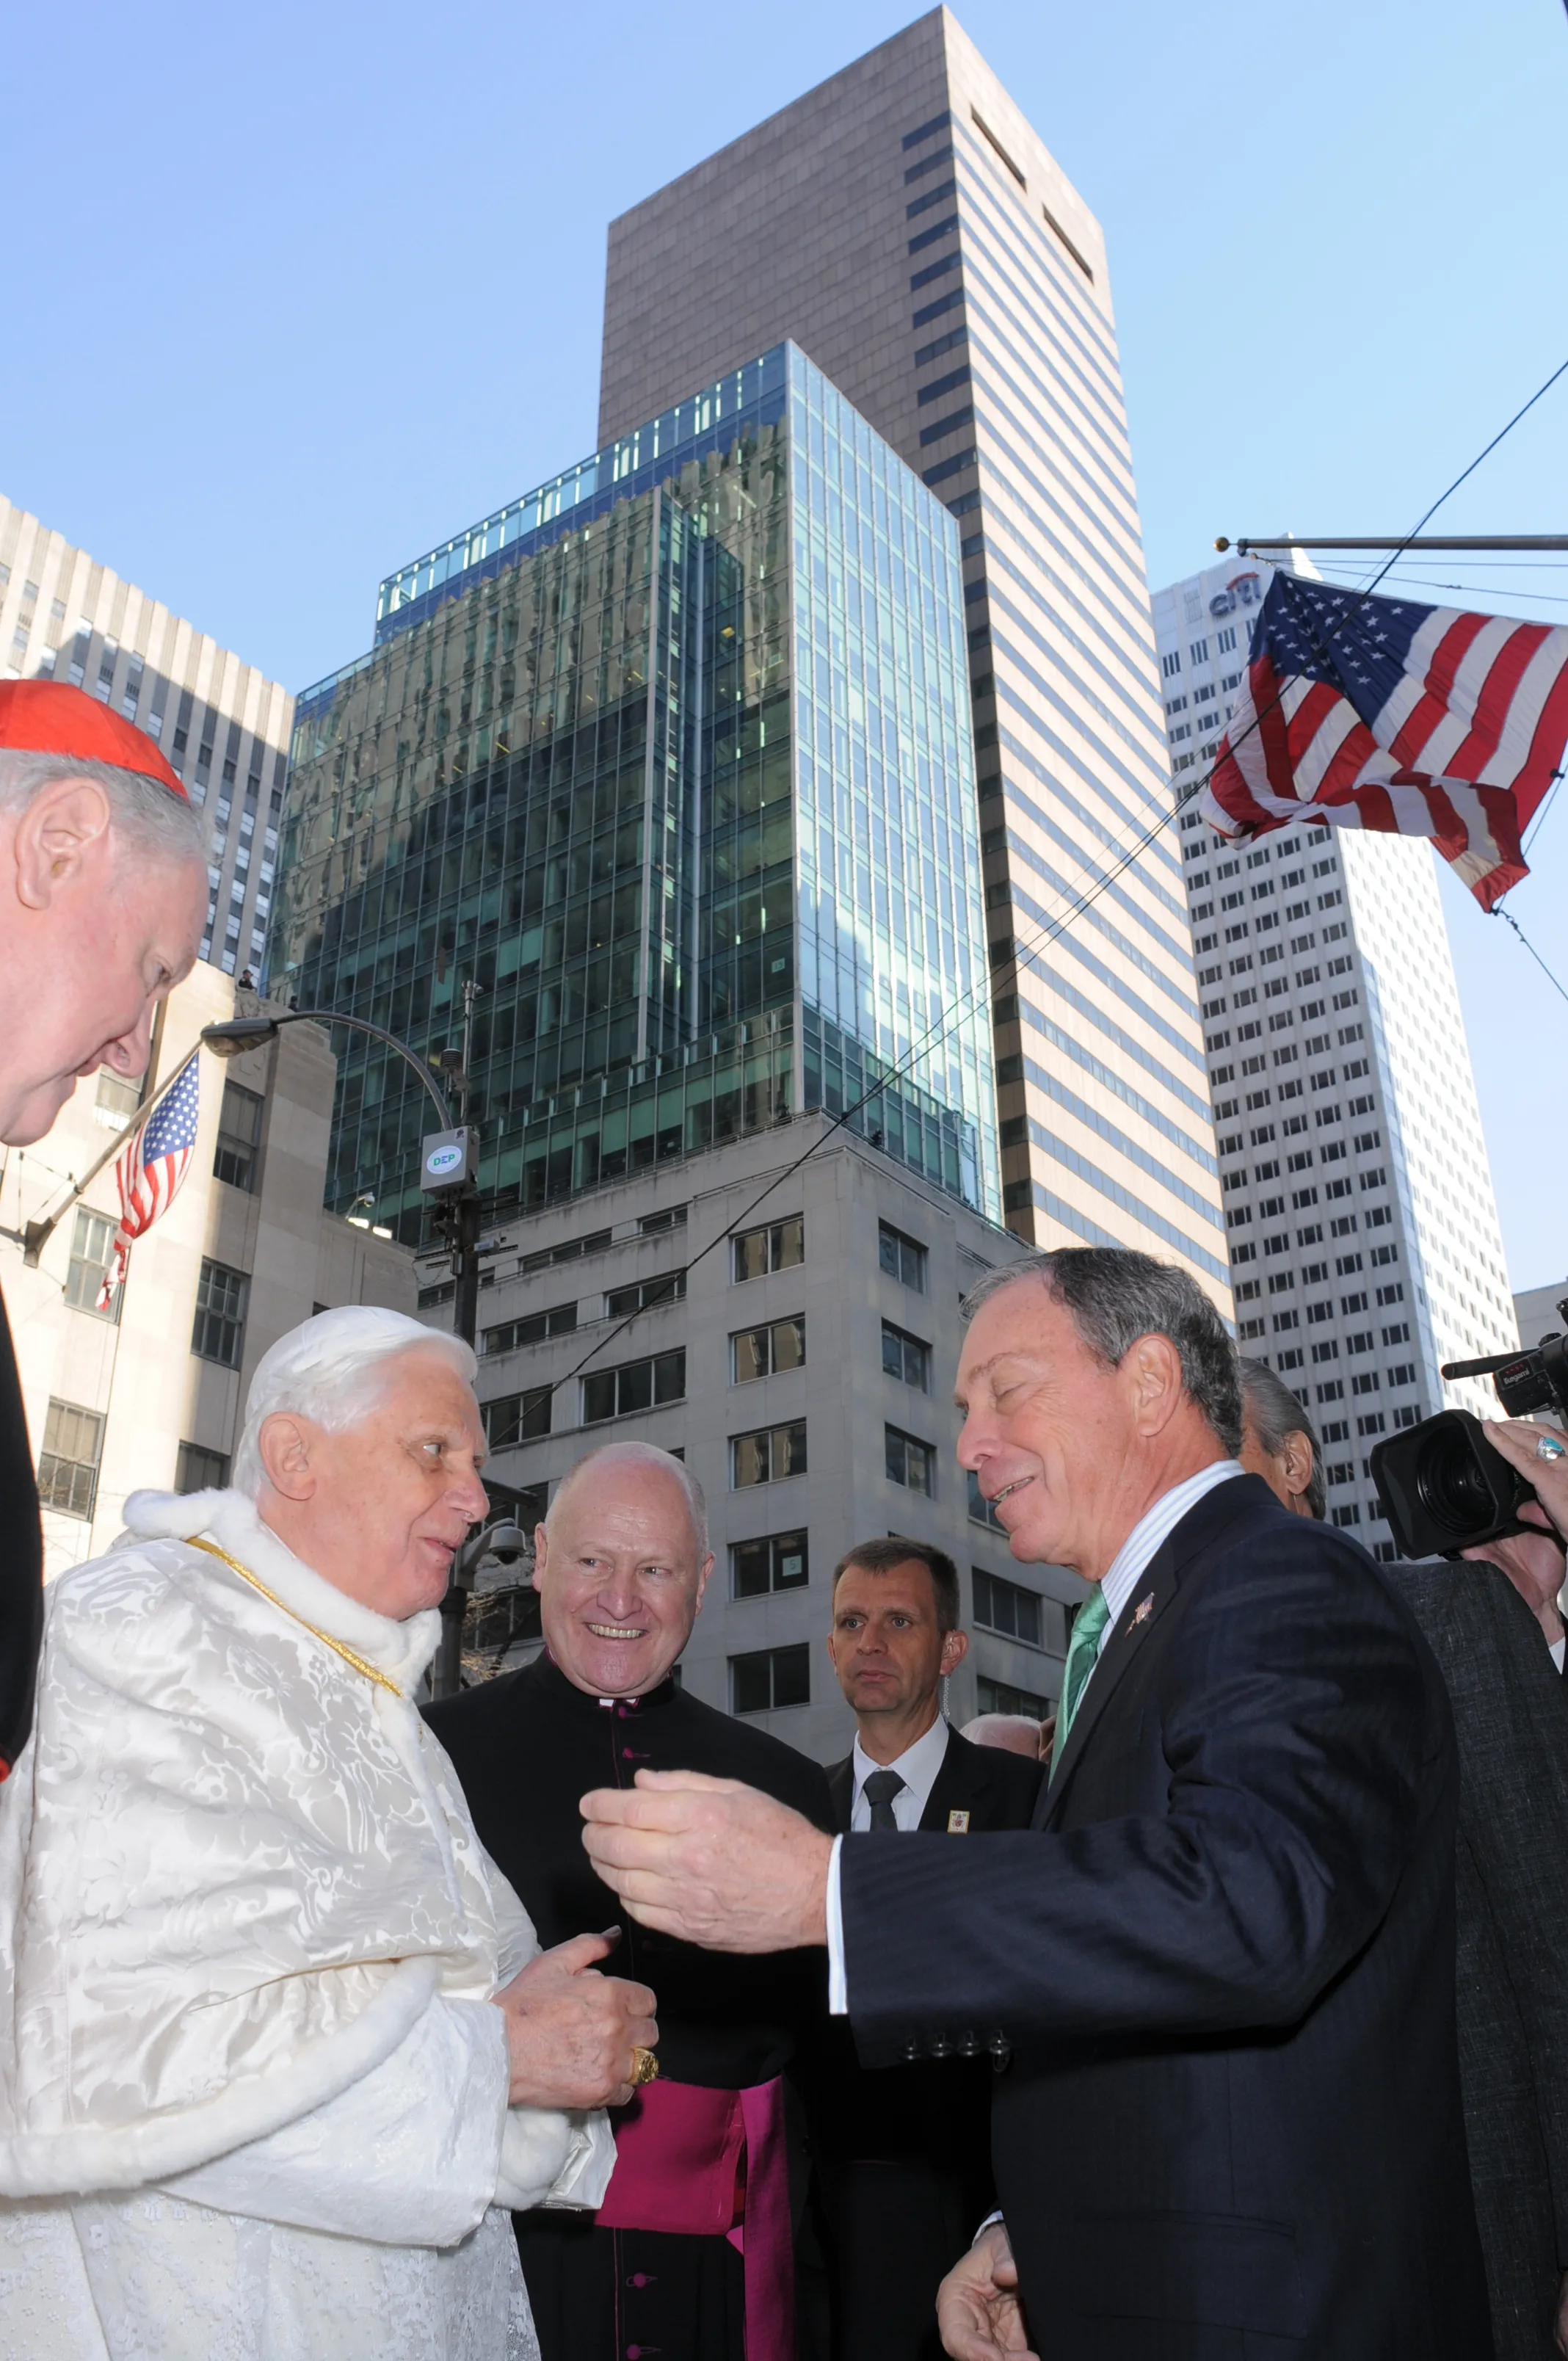 Pope Benedict XVI meets Michael Bloomberg, then mayor of New York City, during his only visit to the United States, April 15–20, 2008. Vatican Media.